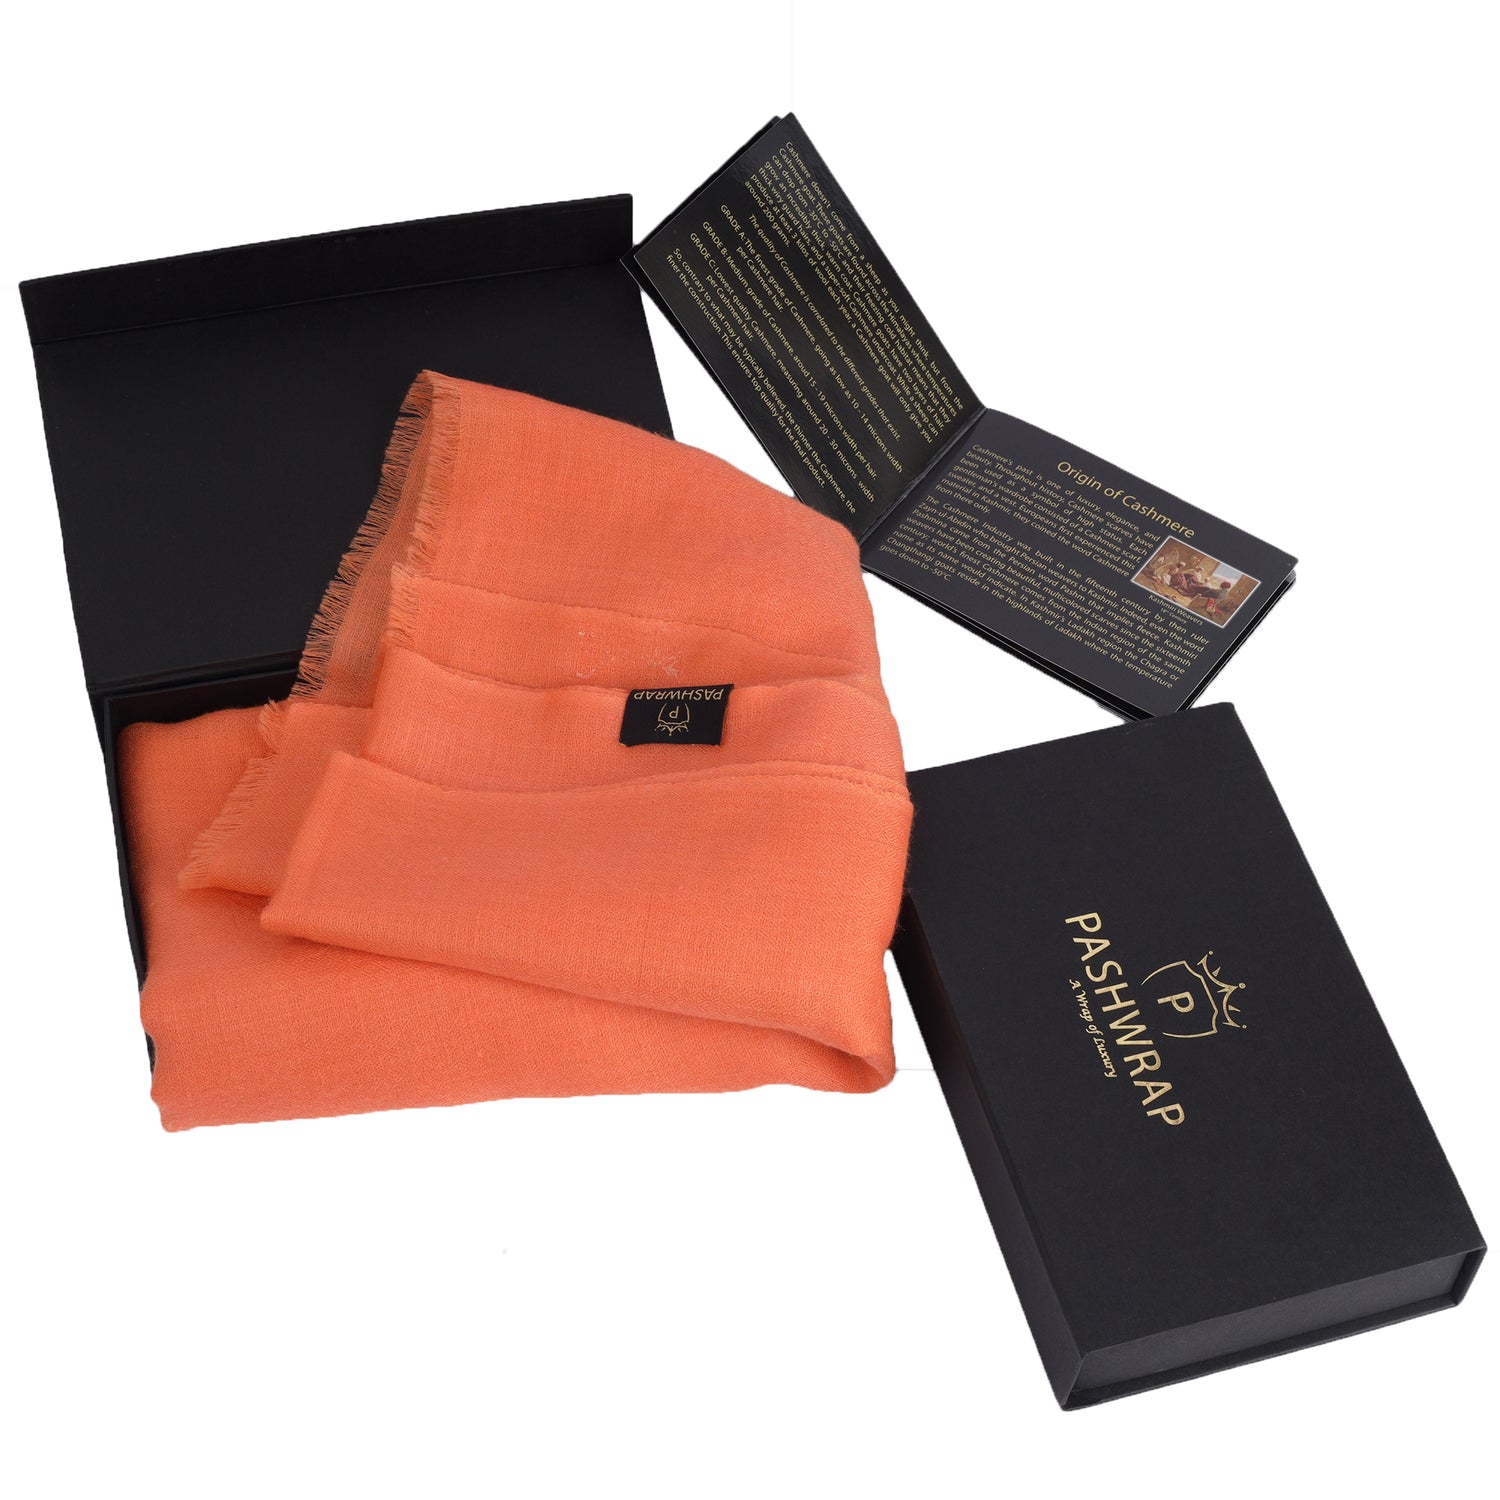 A Gift box packing of Pashwrap showing a Cashmere Scarf in a Box with a product Booklet inside